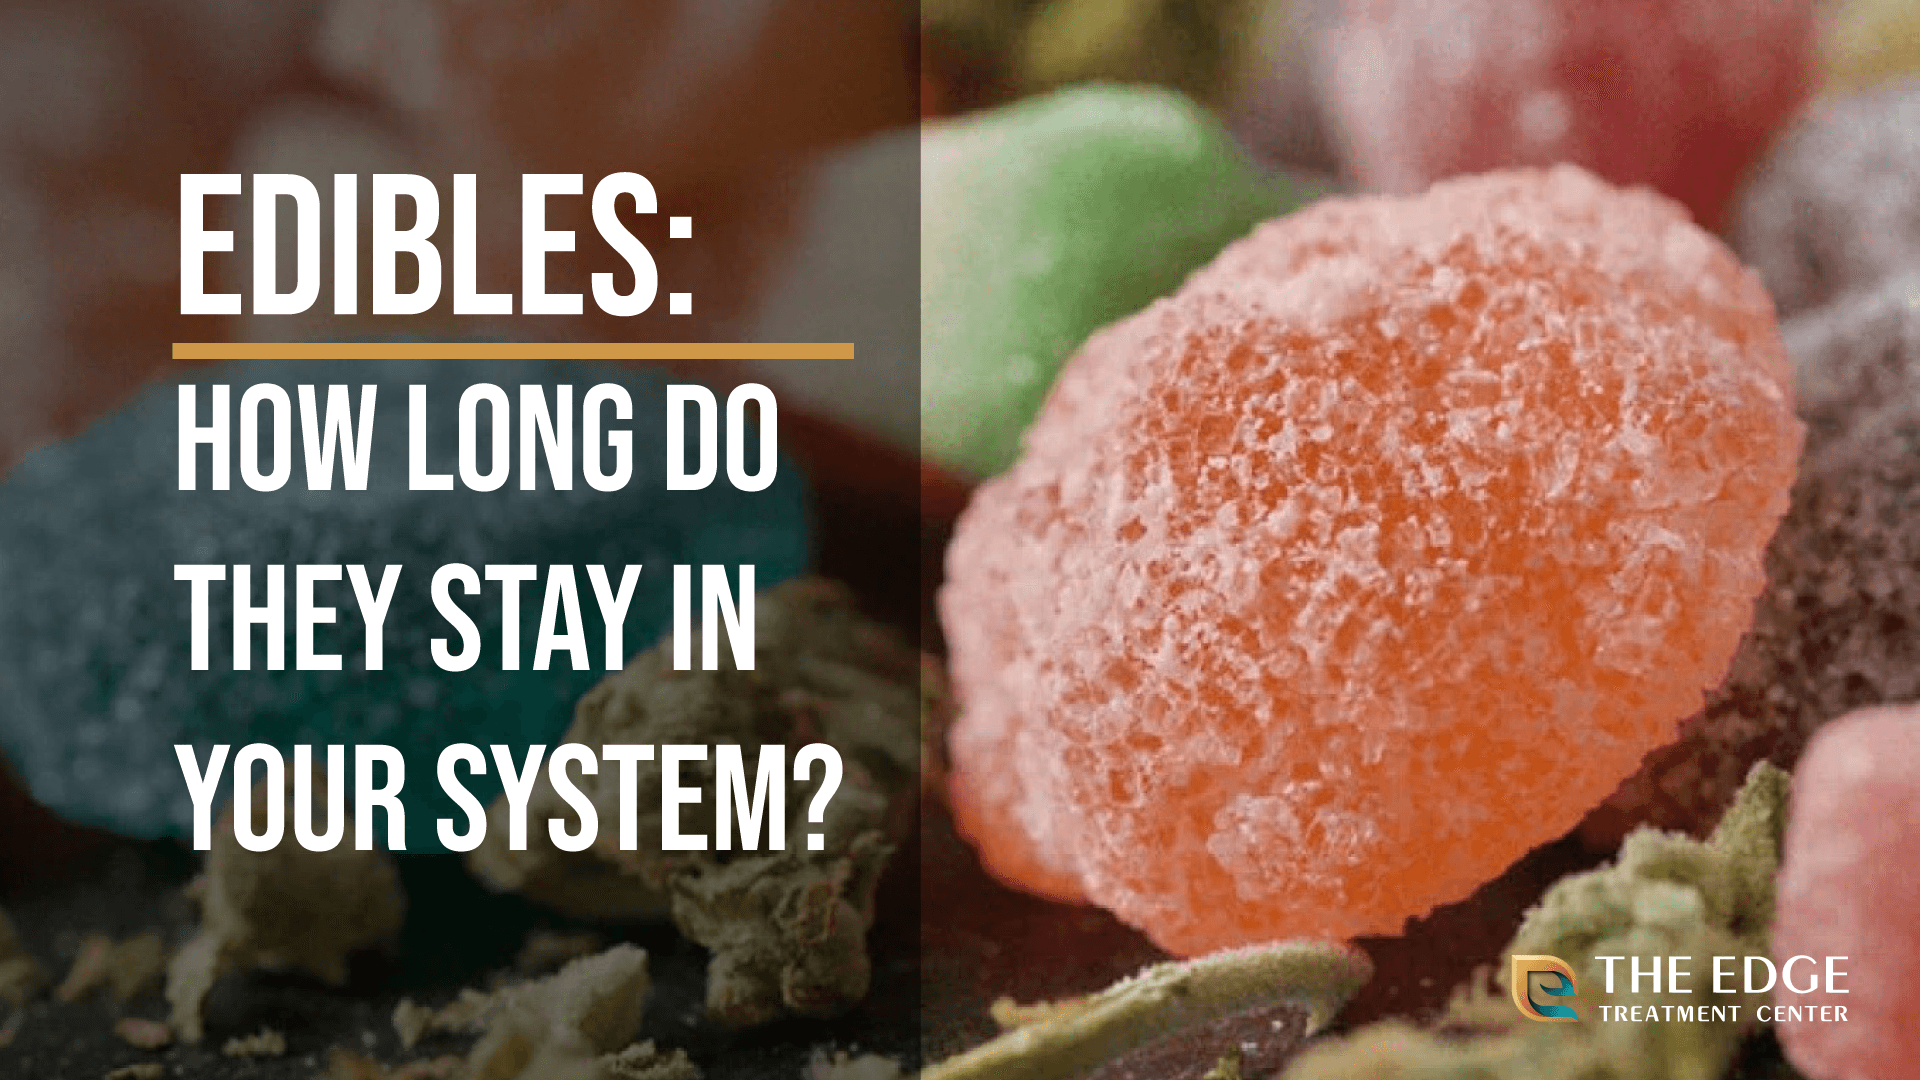 Edibles: How Long Do They Stay in Your System?